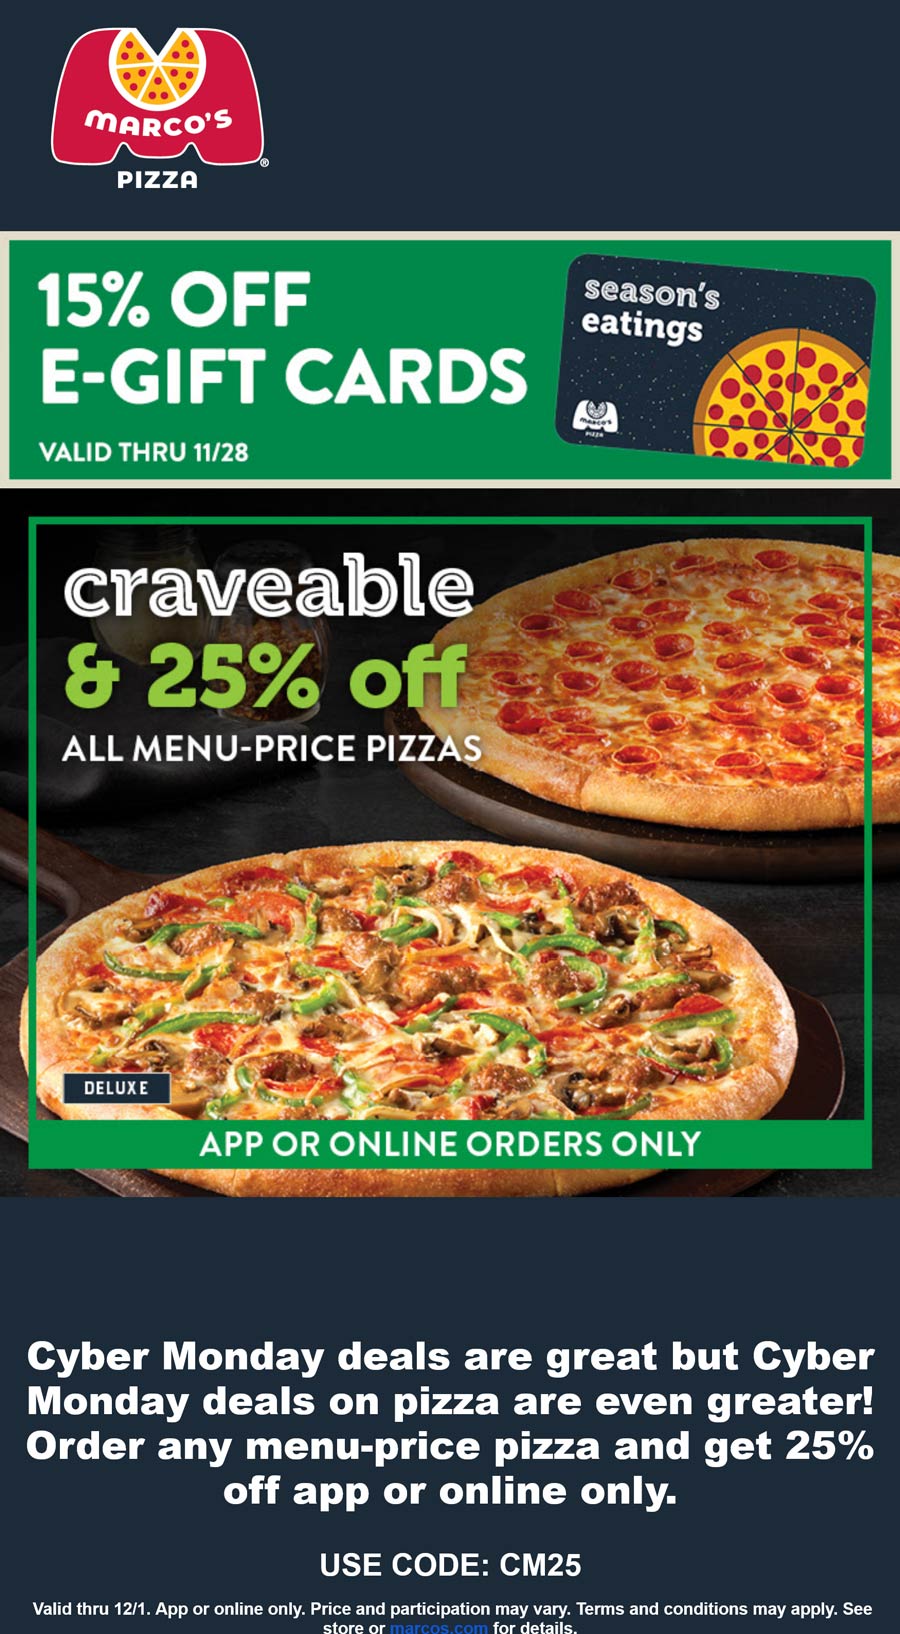 Marcos restaurants Coupon  25% off pizza today at Marcos via promo code CM25 #marcos 